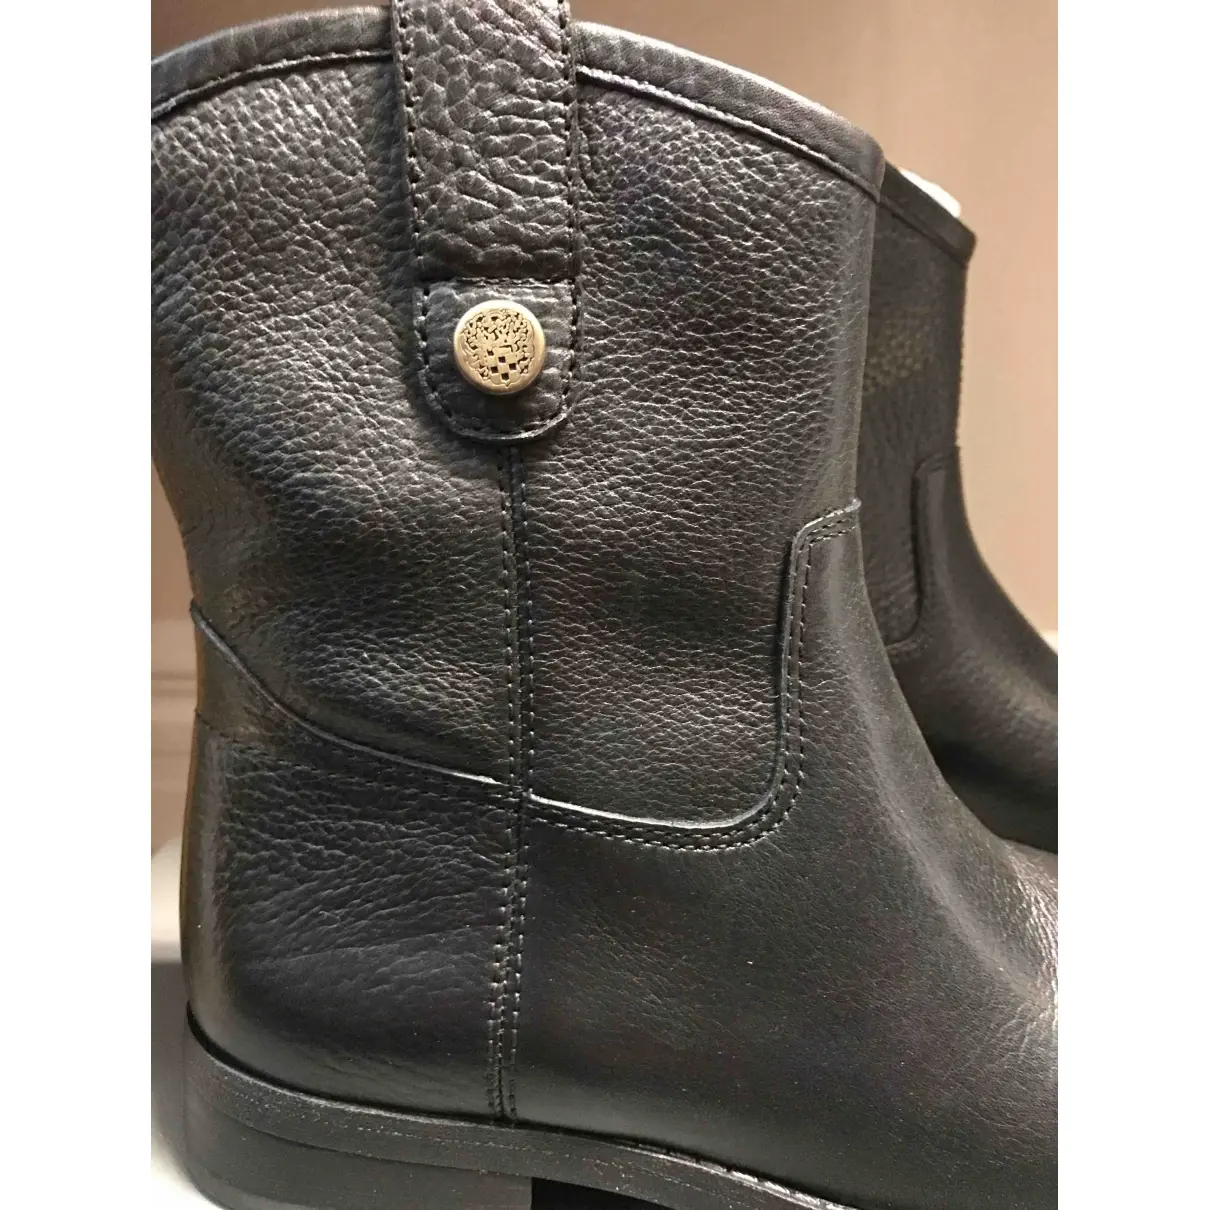 Buy Vince  Camuto Leather biker boots online